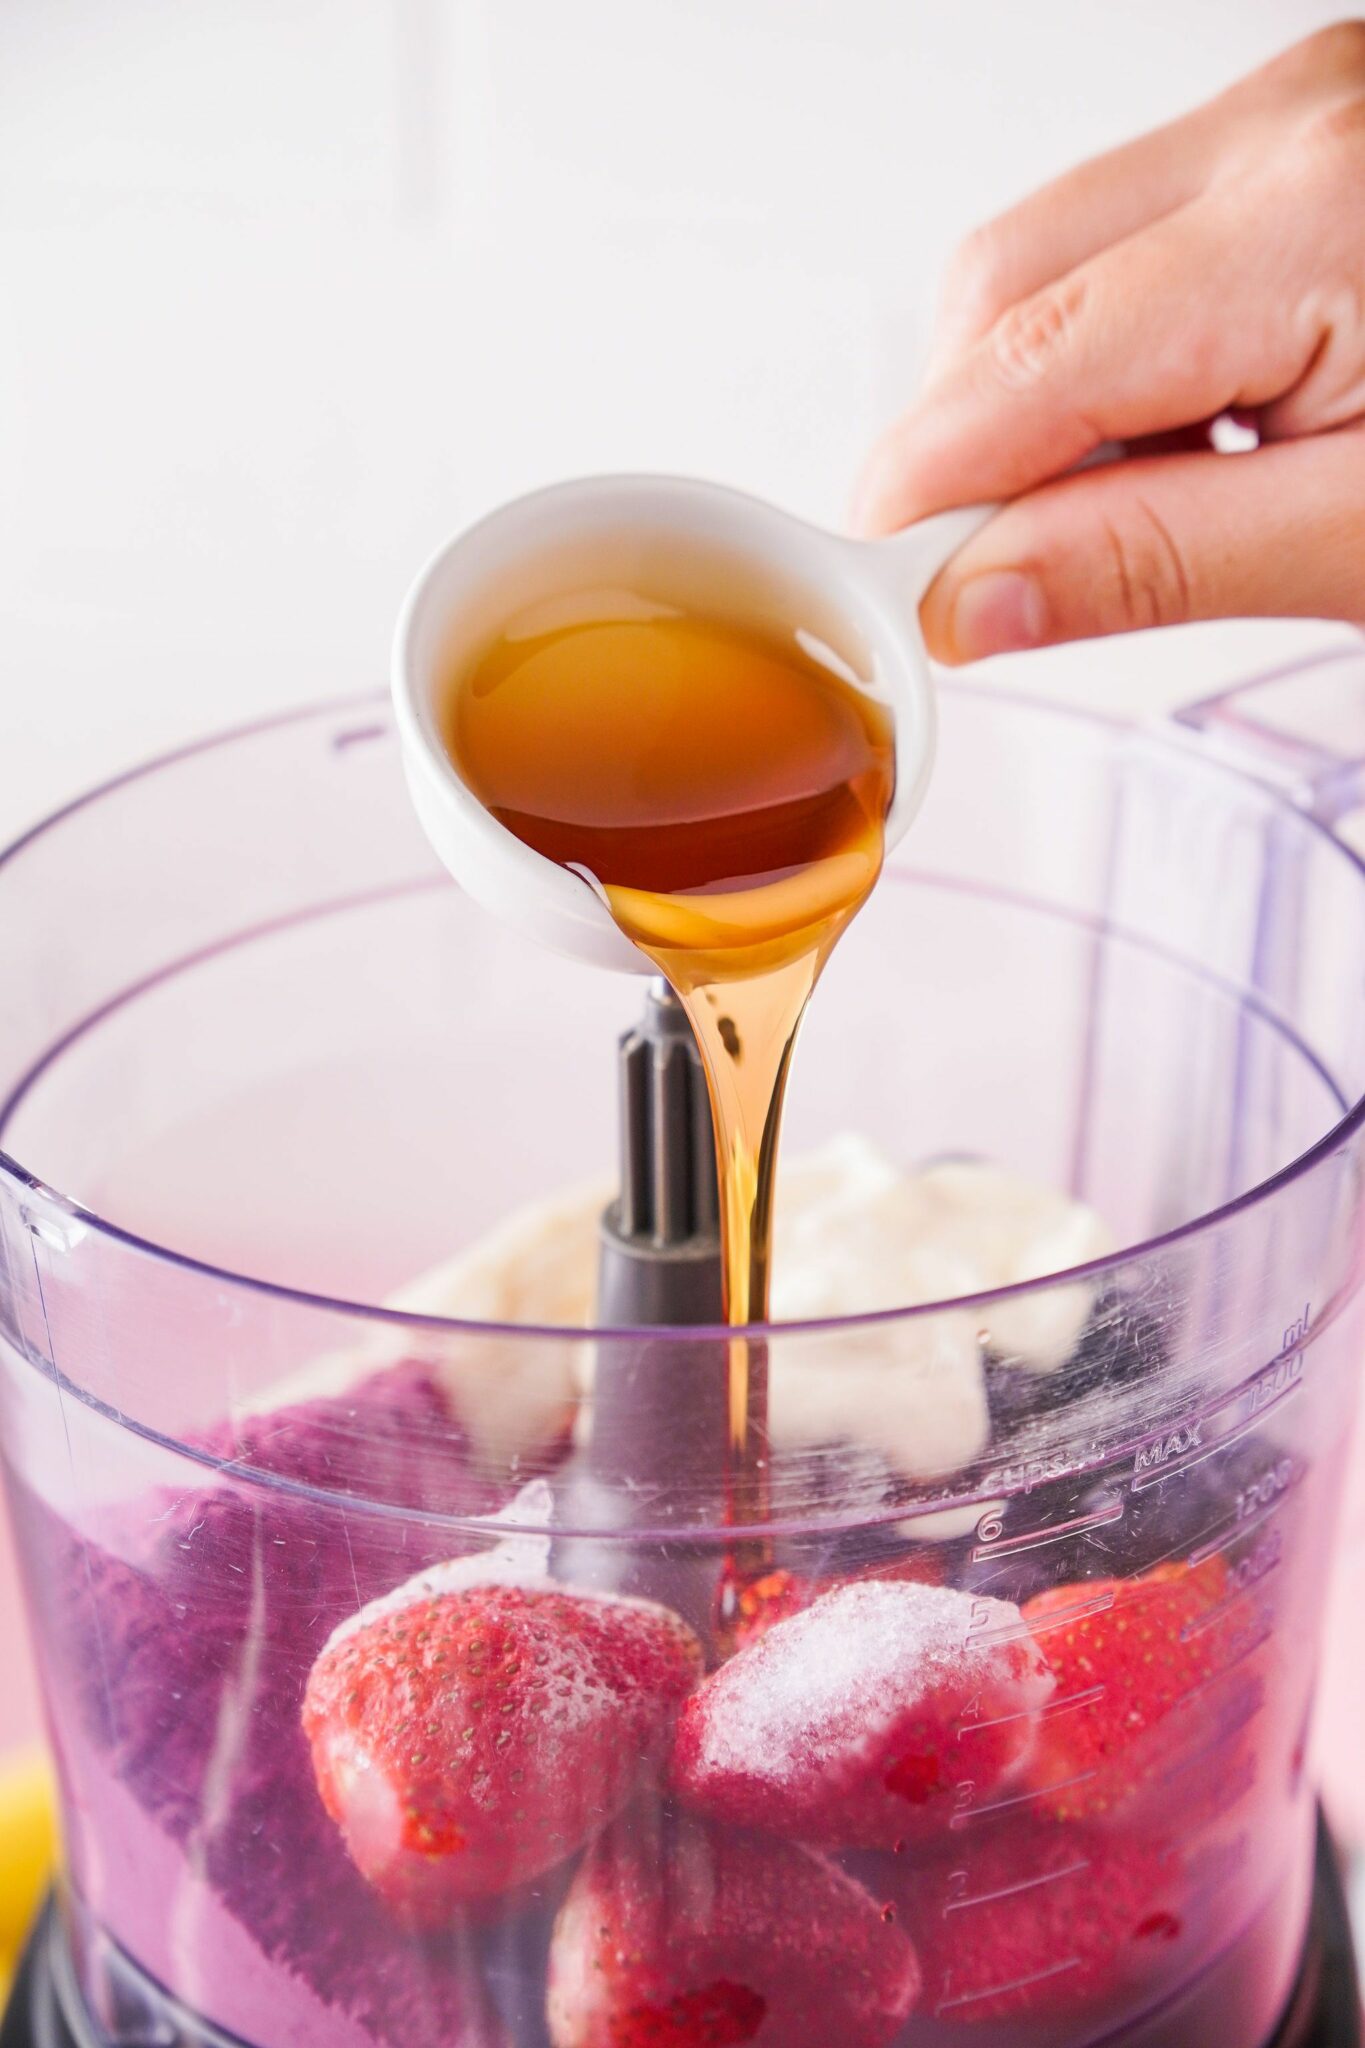 How To Make An Acai Bowl // pouring maple syrup into blender